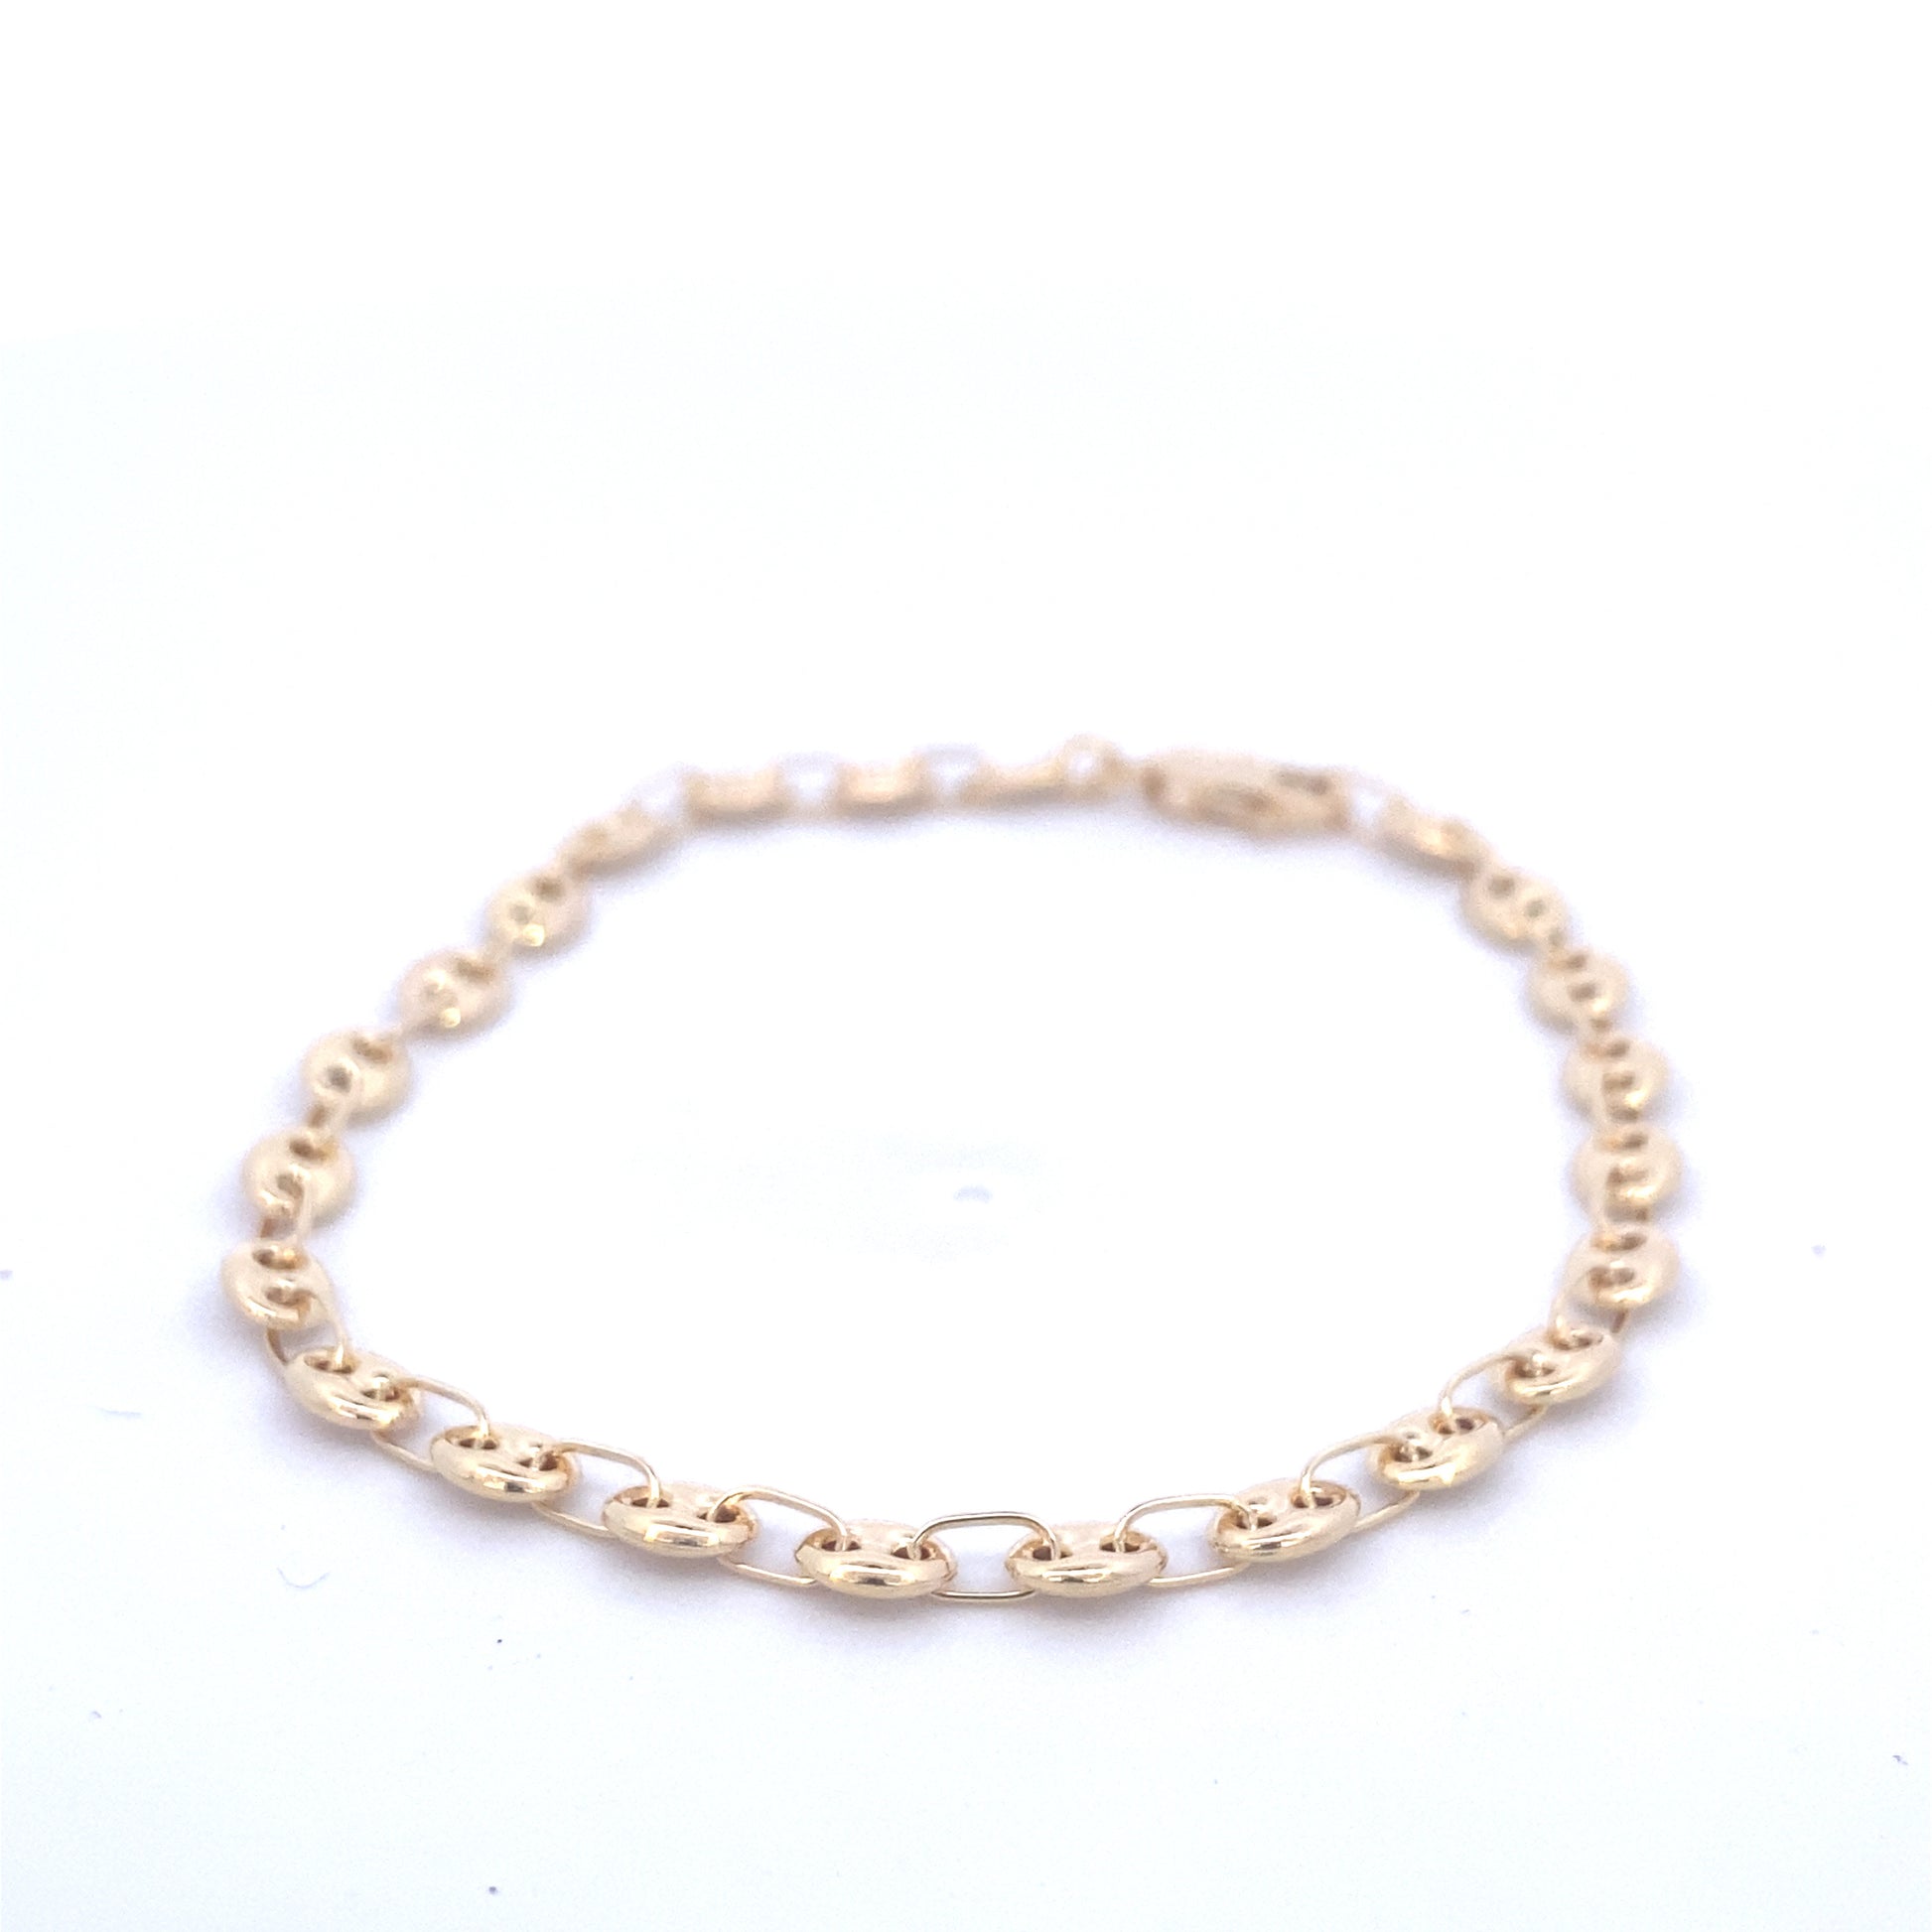 14K Gold Small Puff Link Bracelet | Luby Gold Collection | Luby 